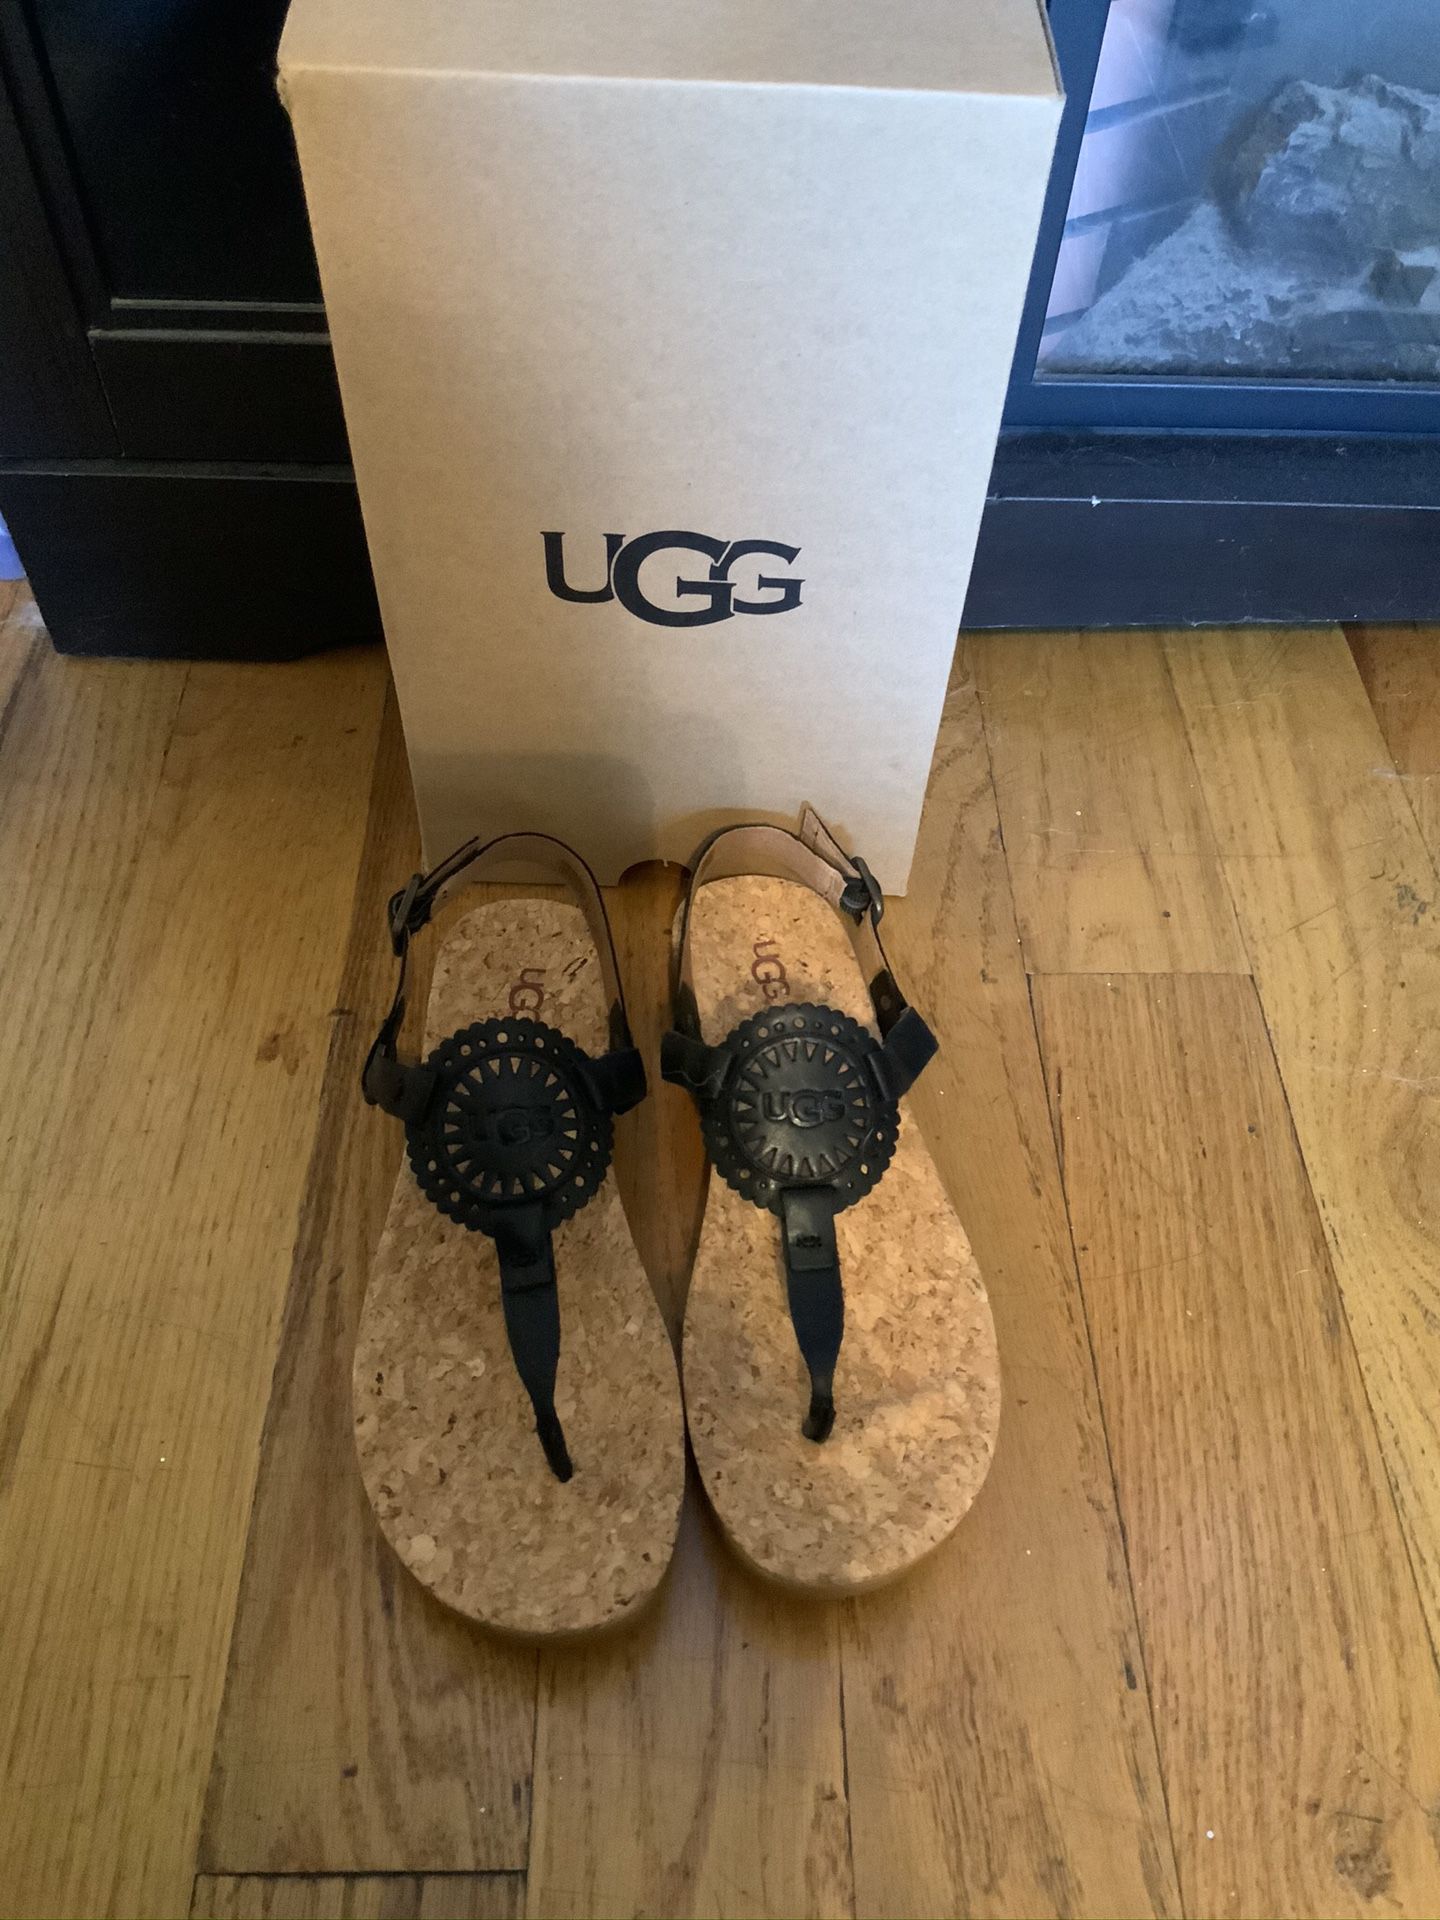 New ugg sandals size 8 Pick up in Bronx (Cash)Firm price. No trades. If you're not buying today, don't send msgs. Thanks